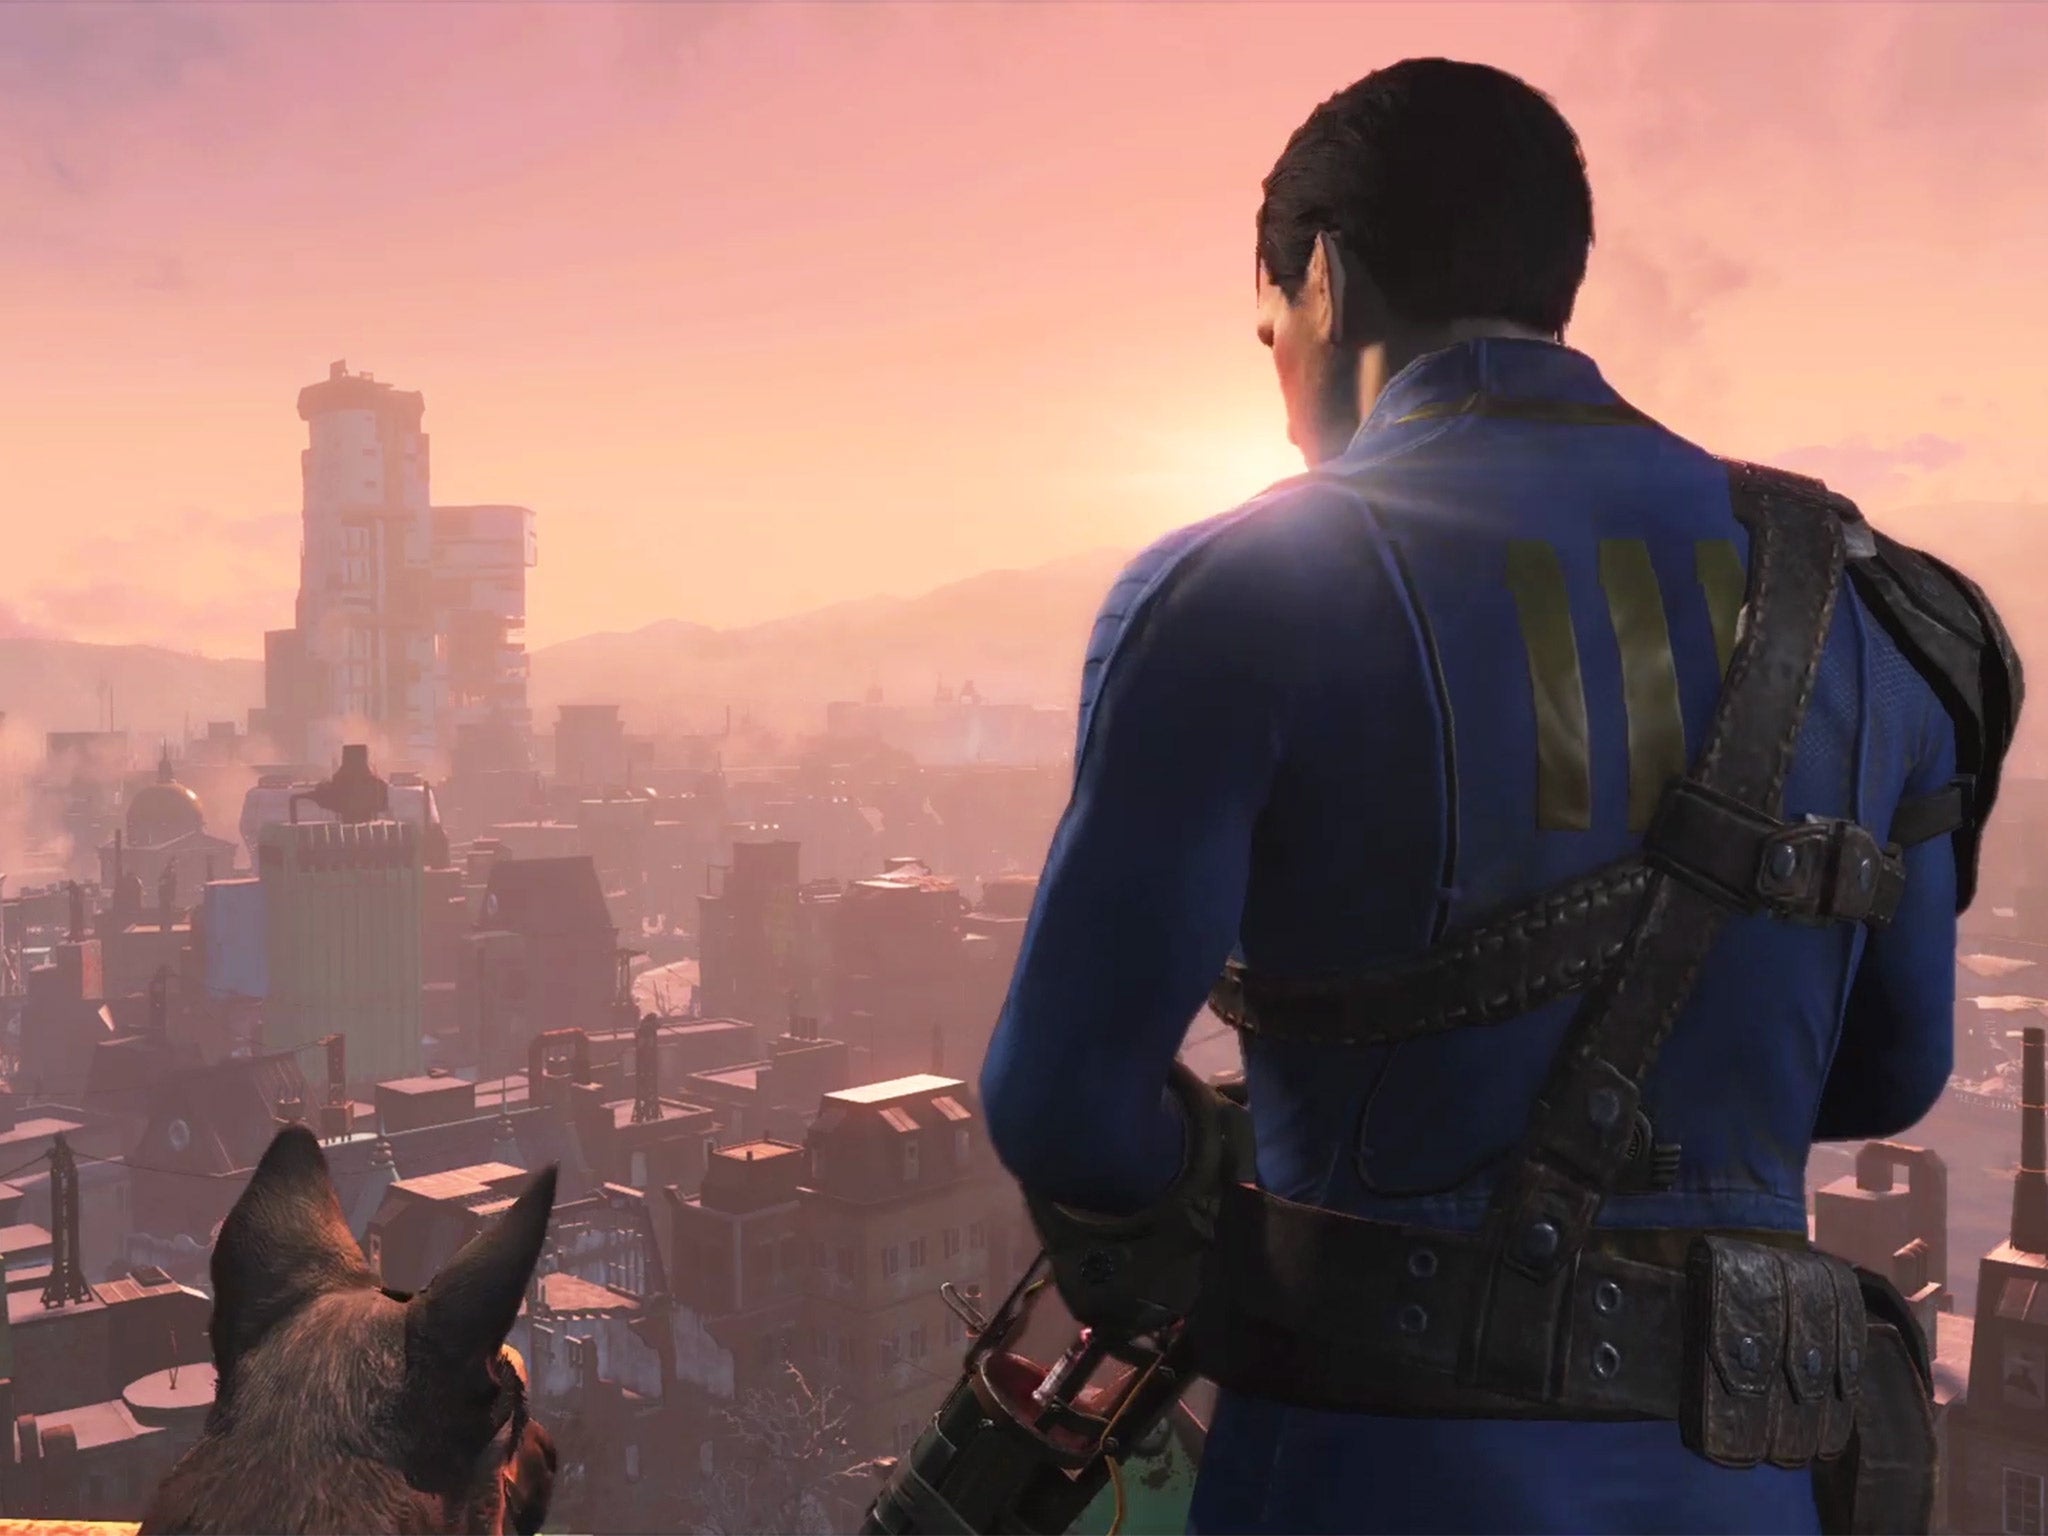 Fallout 4’s creators believe that games will prove their artistic merit